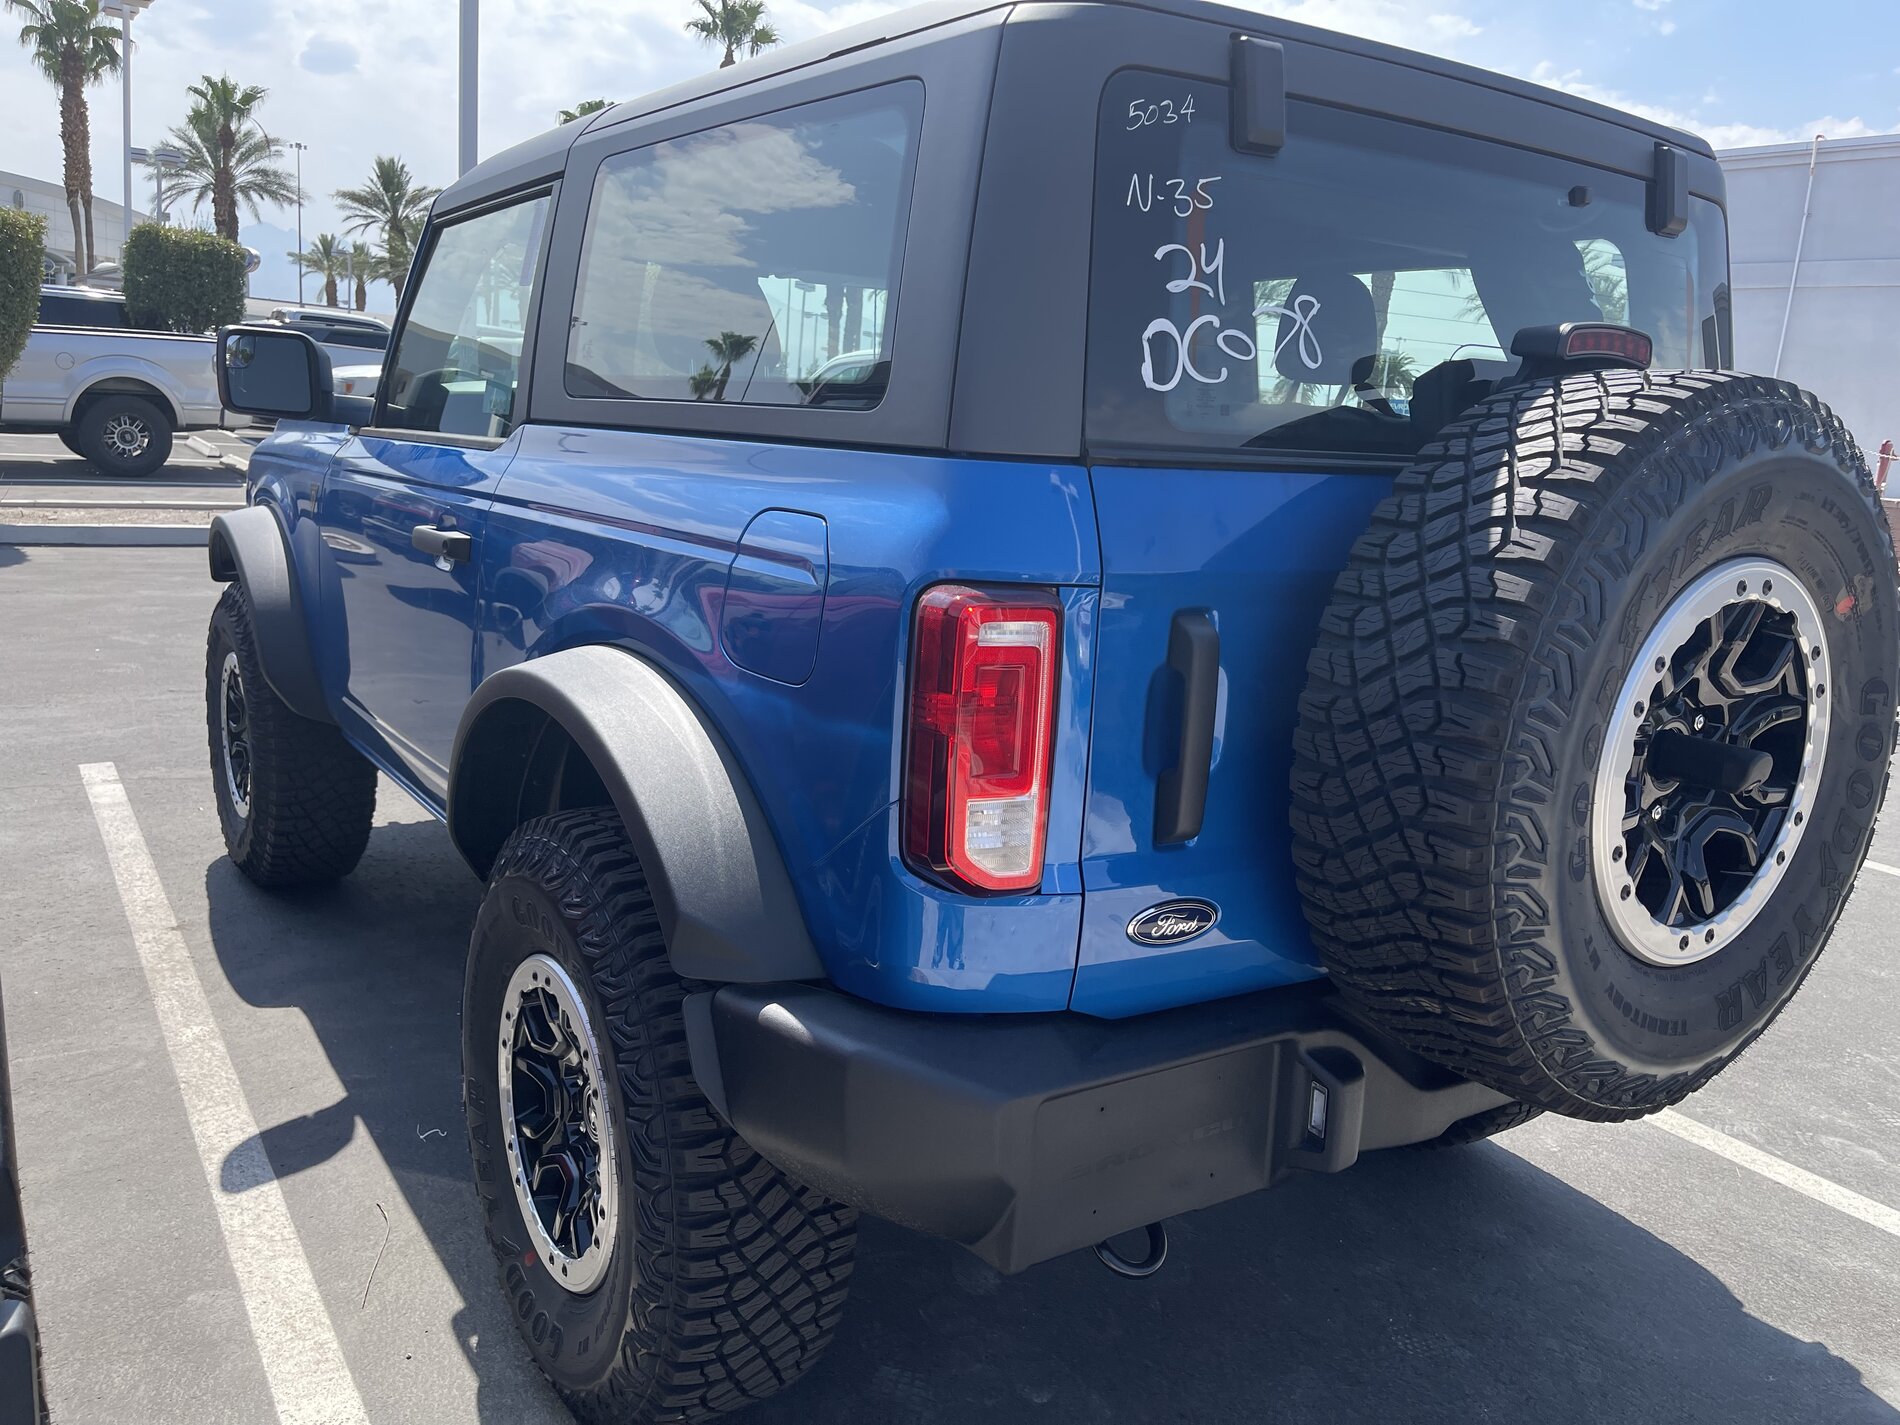 Ford Bronco Bronco spotting at my local dealership. E8D093BC-5708-4D18-BC3A-E569CF342962